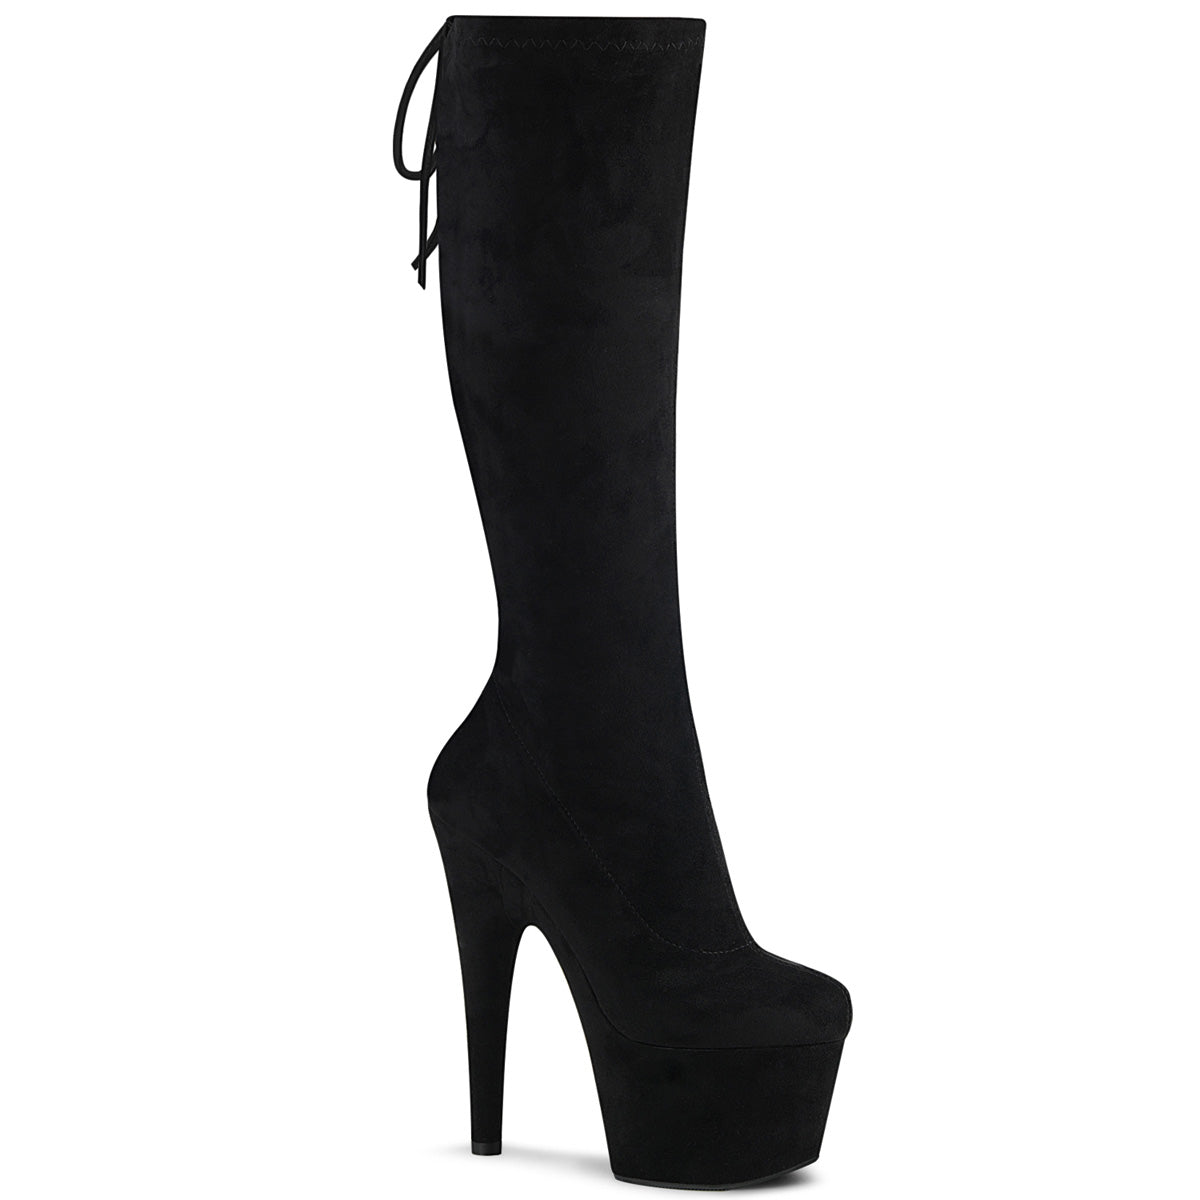 ADORE-2008 Pleasers Black Exotic Dancing Knee High Boots